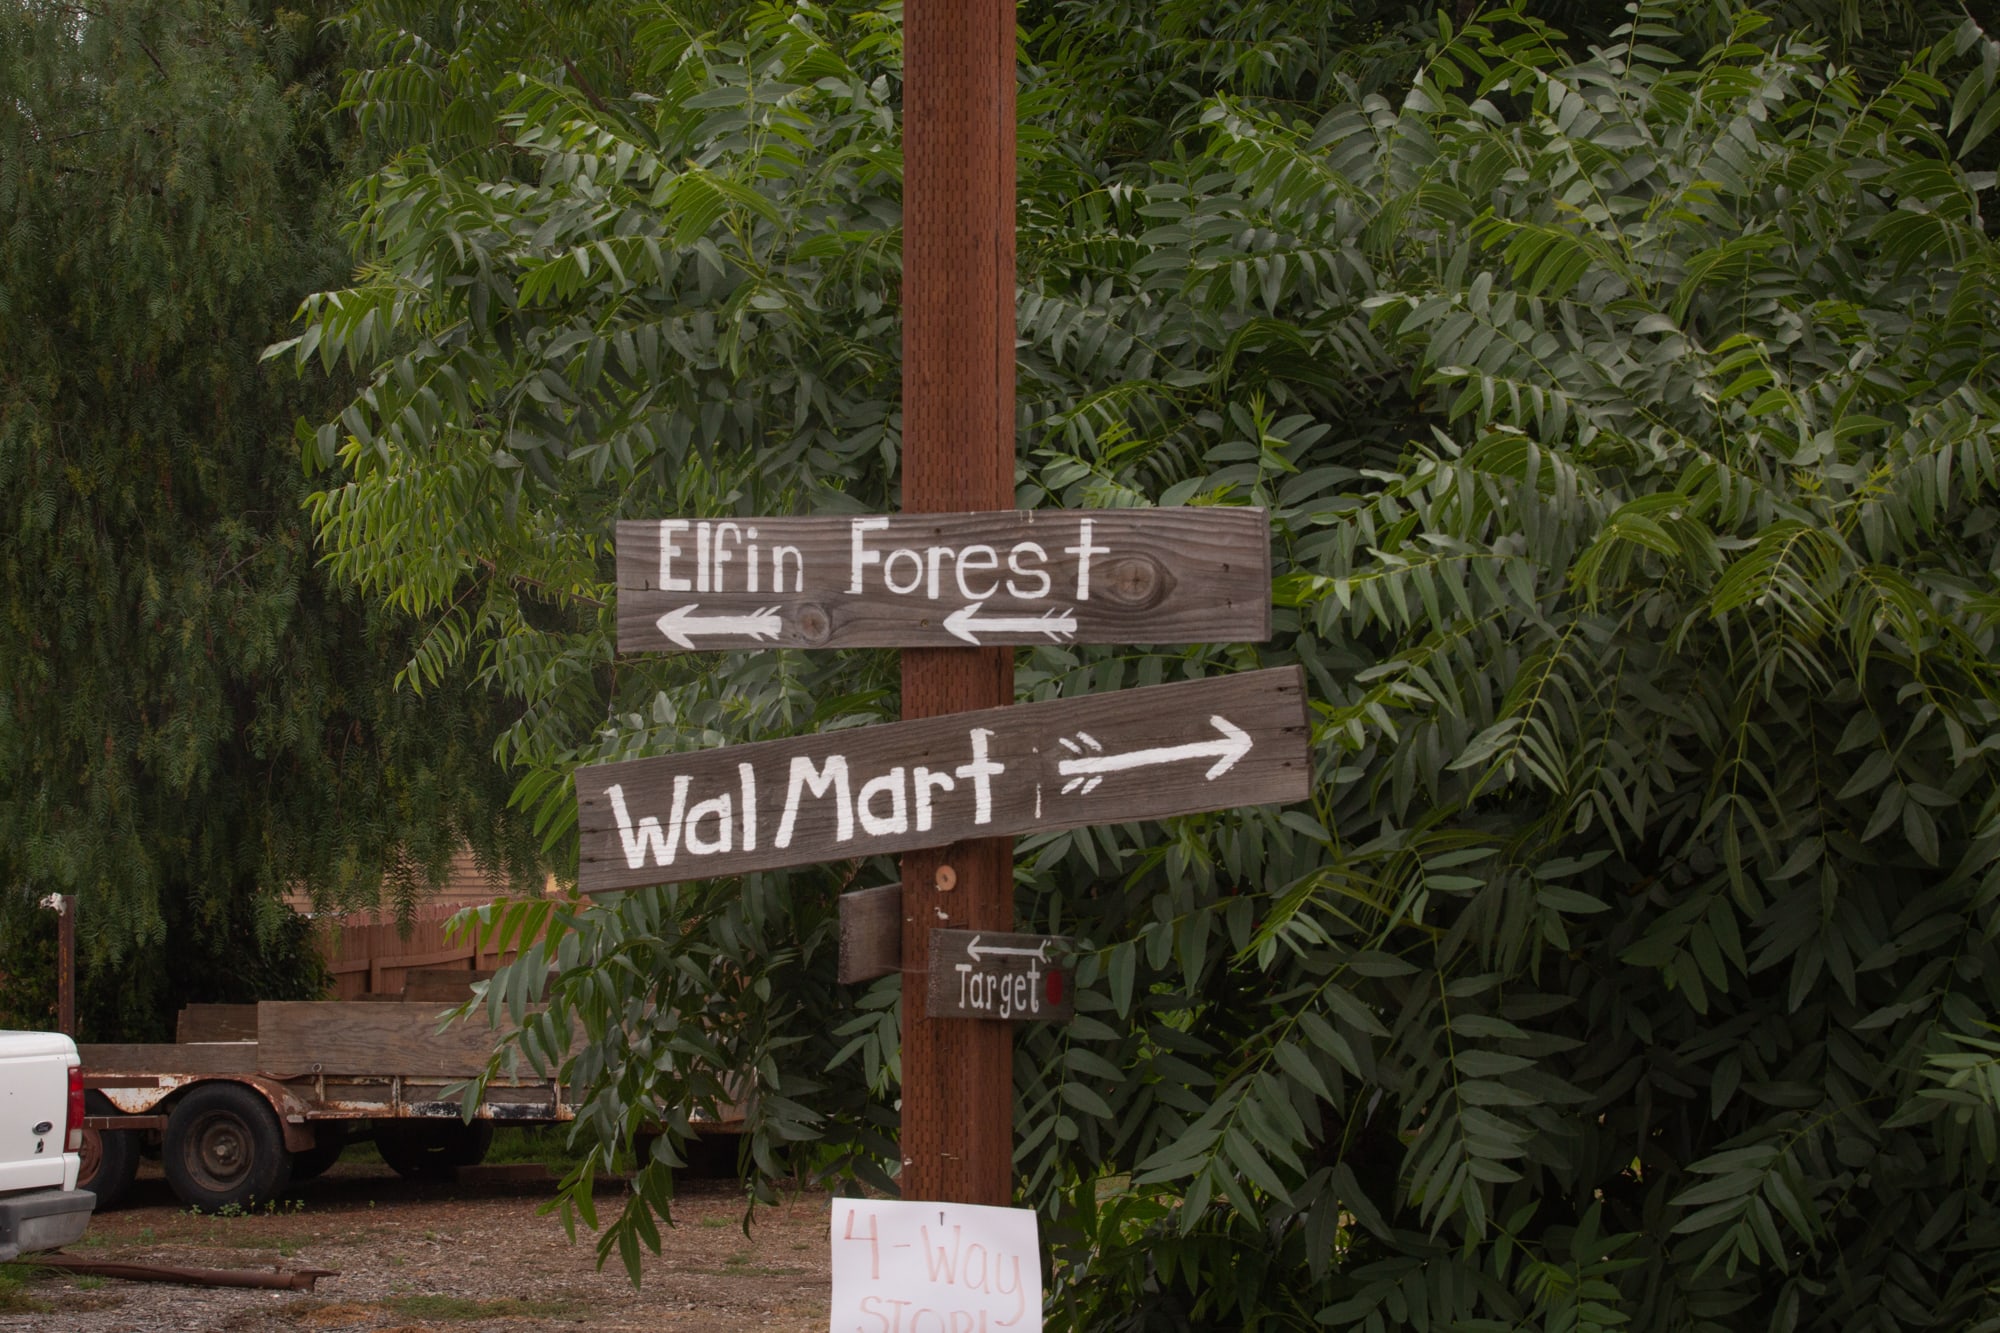 Homemade signs are a tongue-in-cheek nod to years of tension among Elfin Forest, Harmony Grove and other rural communities in San Diego County. (Kailey Broussard/News21)